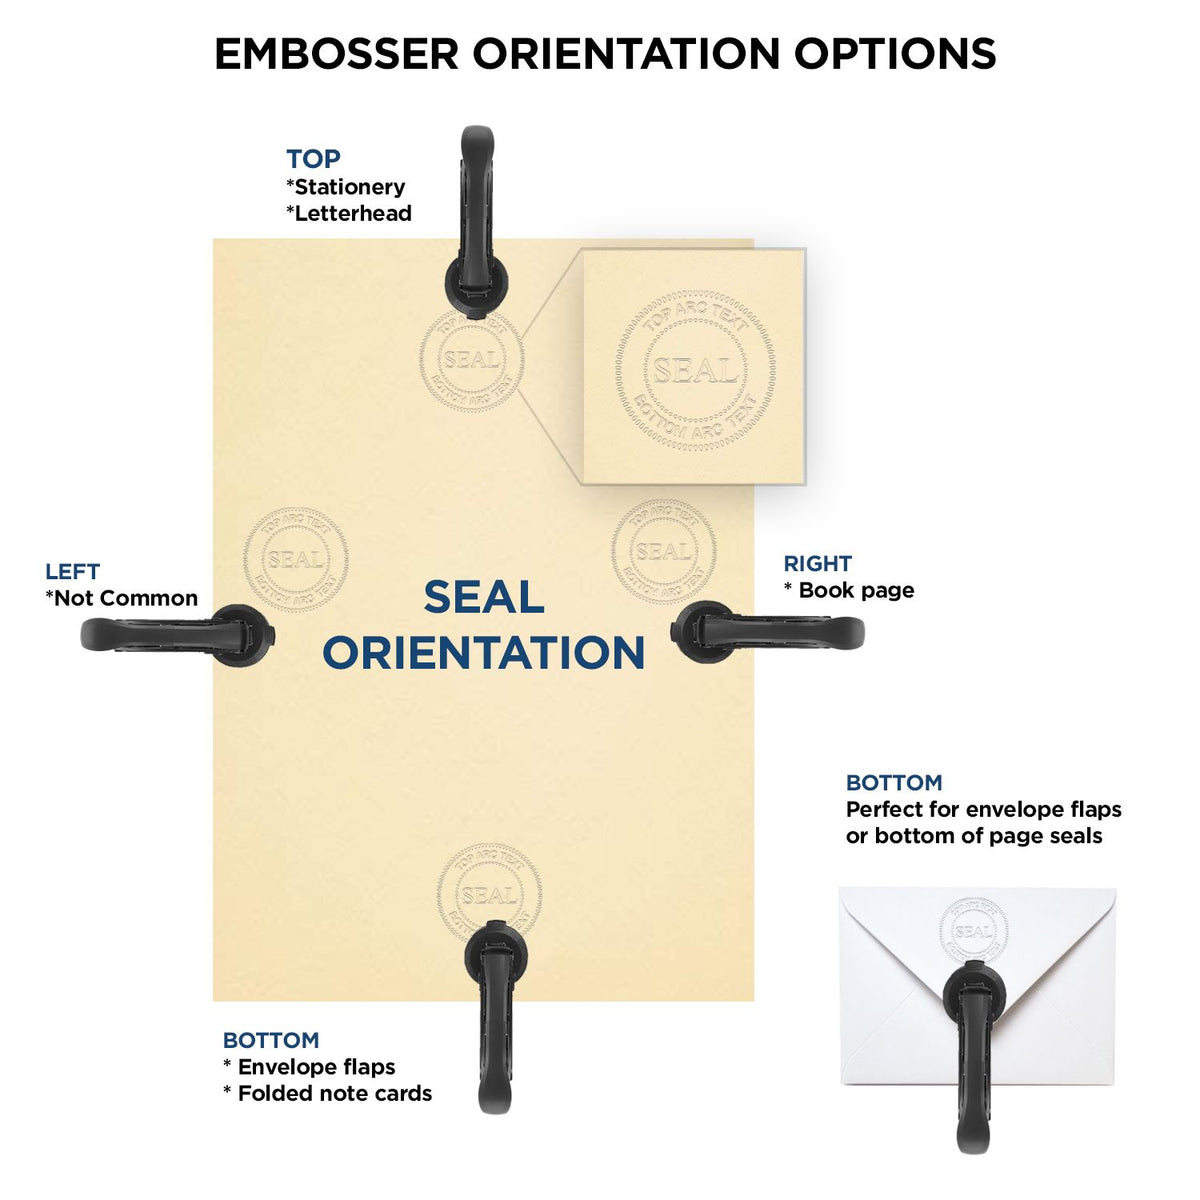 An infographic for the Heavy Duty Cast Iron Kansas Land Surveyor Seal Embosser showing embosser orientation, this is showing examples of a top, bottom, right and left insert.